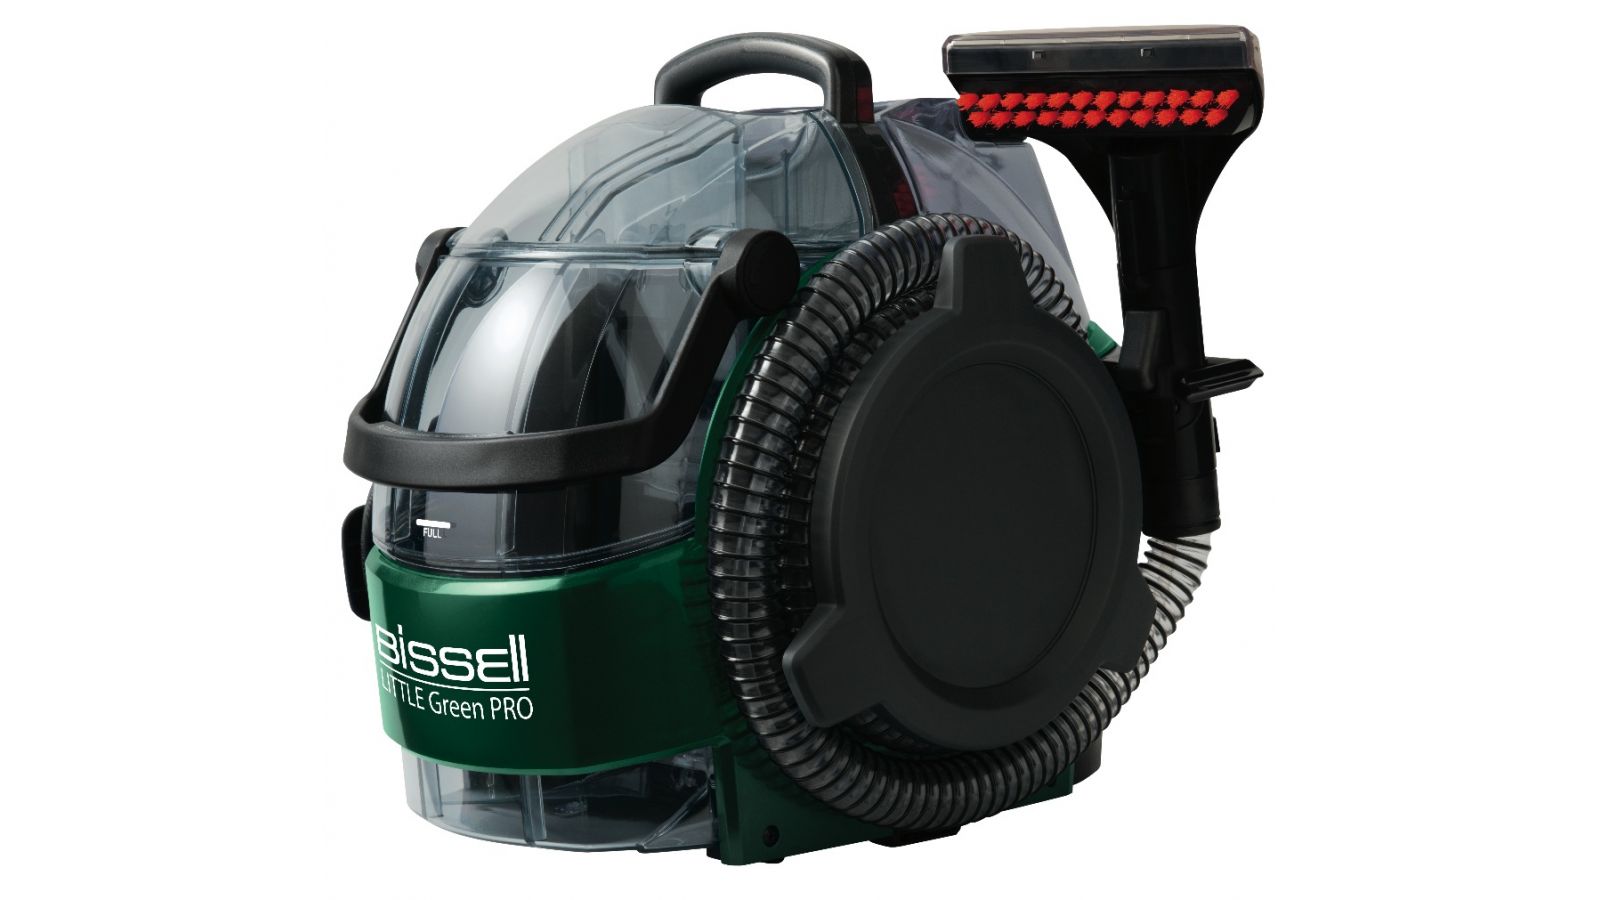 Bissell BigGreen Commercial Little Green Pro Commercial Spot Cleaner